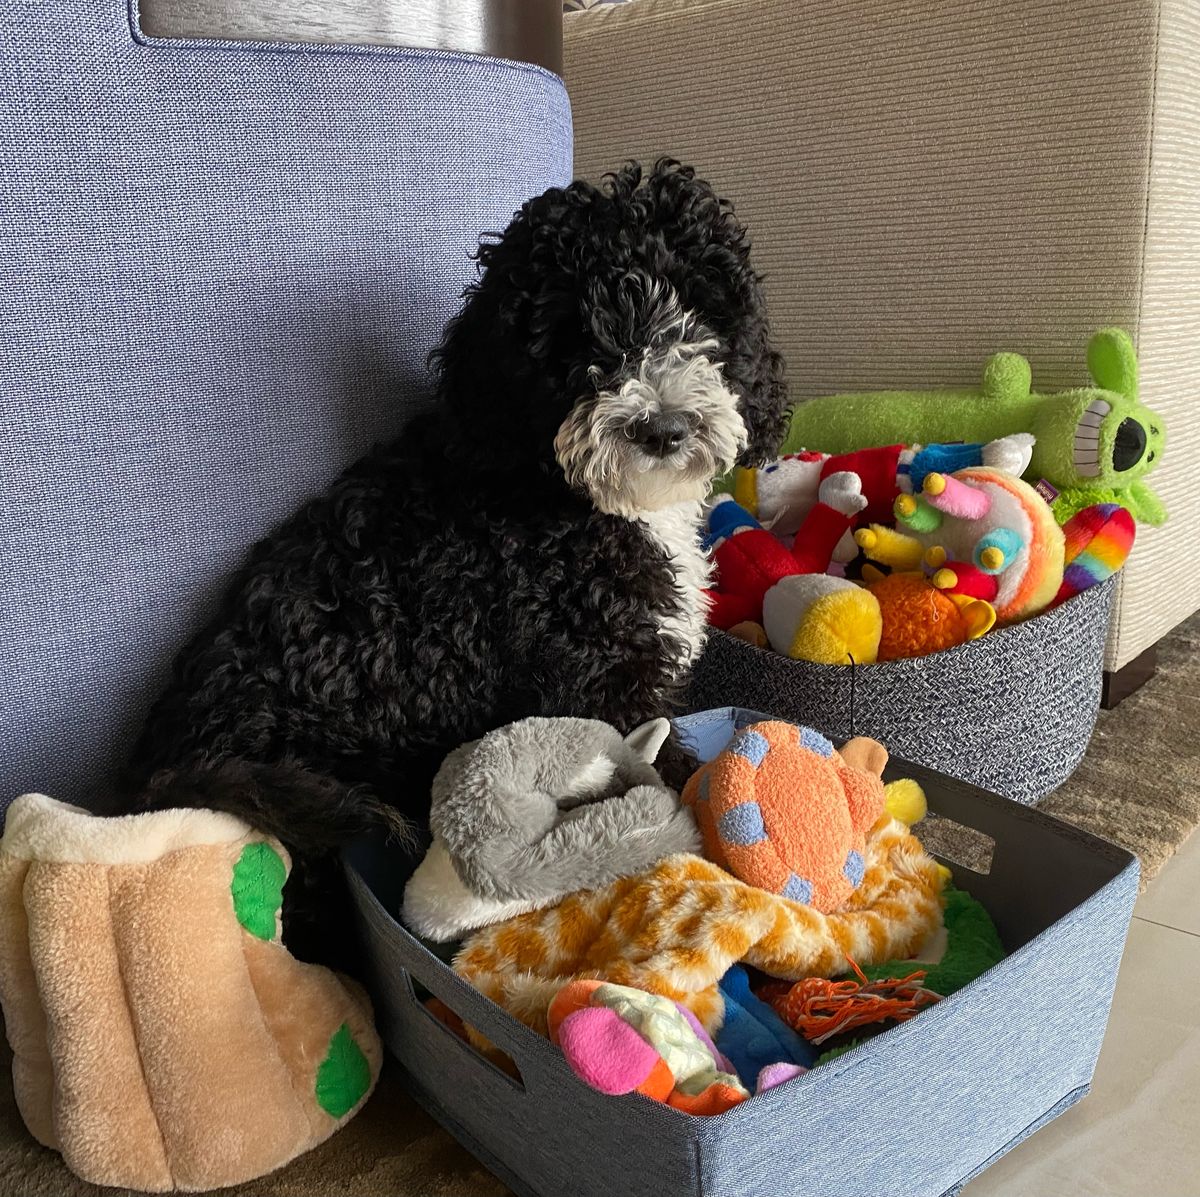 17 Of The Best Toys For Small Dogs On